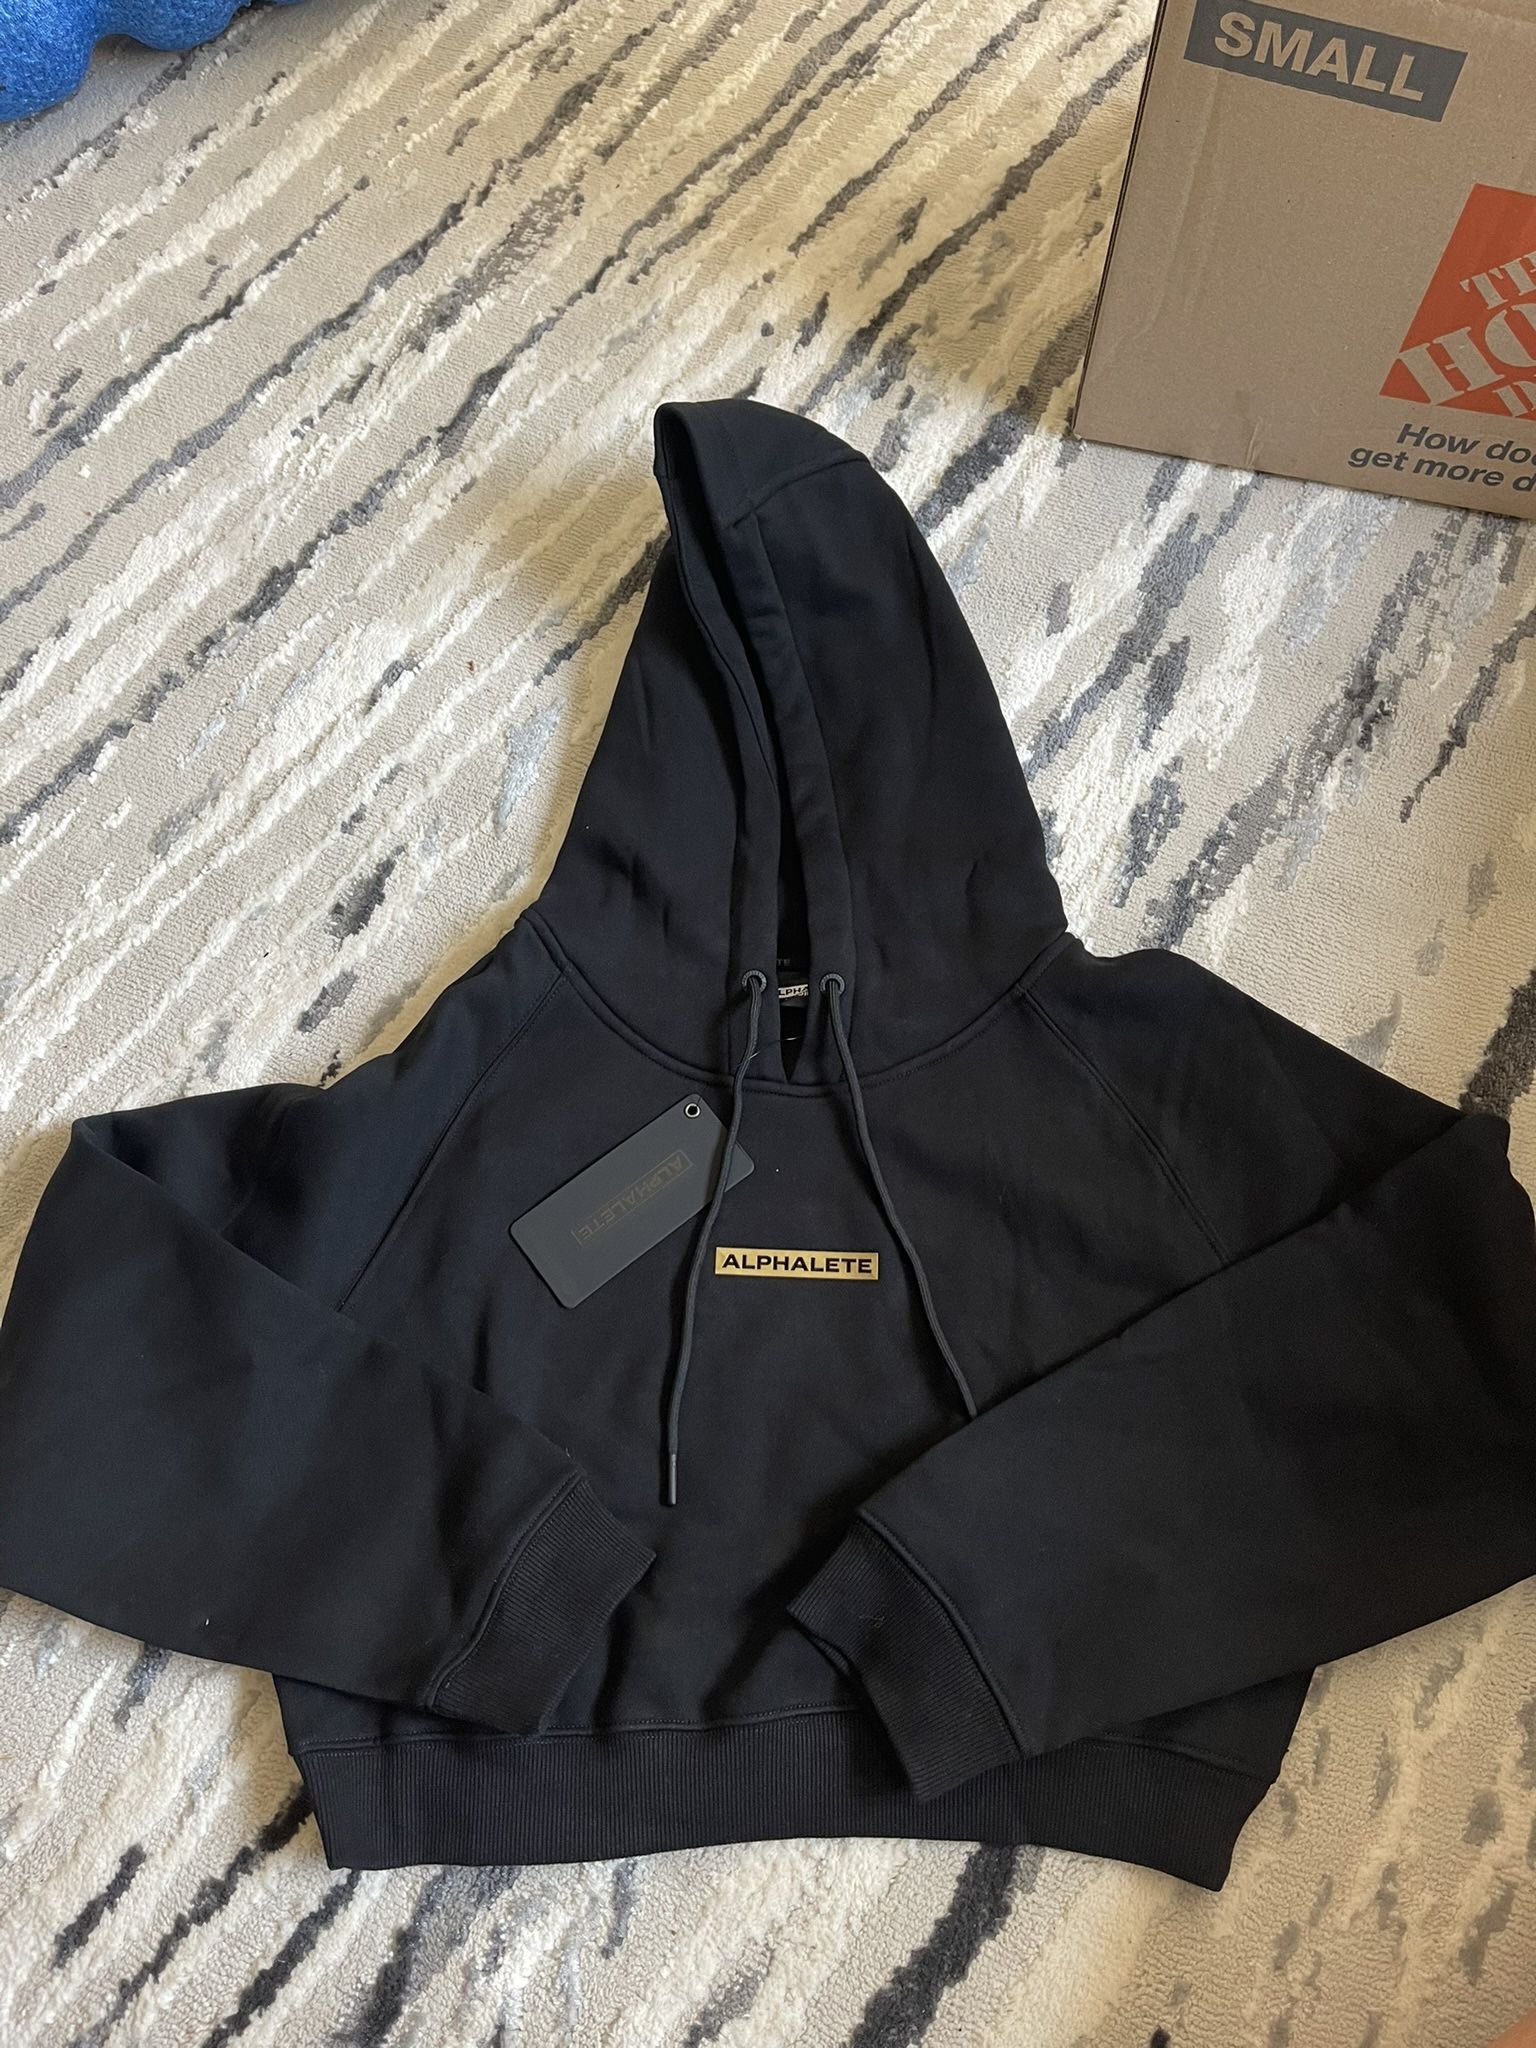 Alphalete Cropped Hoodie (New In bag With Tags)